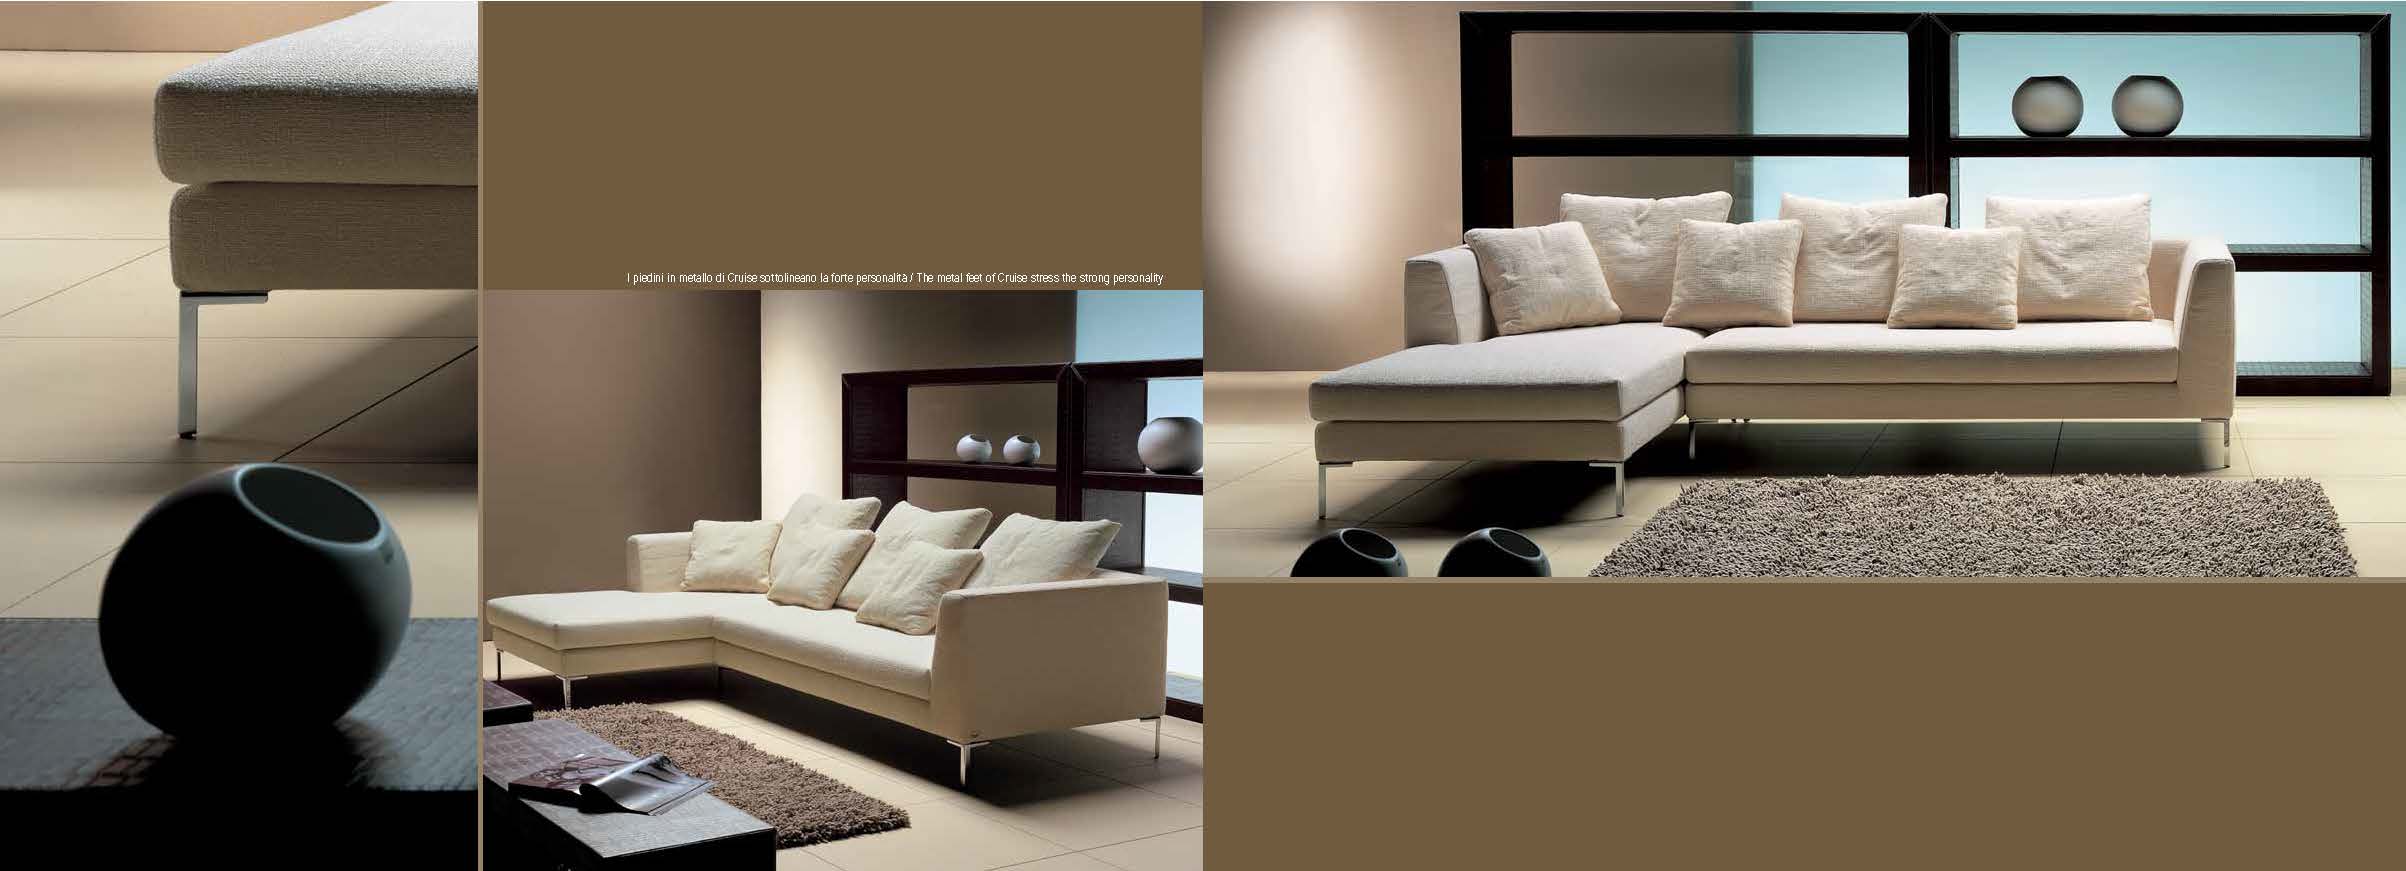 Living Room Furniture Sofas Loveseats and Chairs Cruise